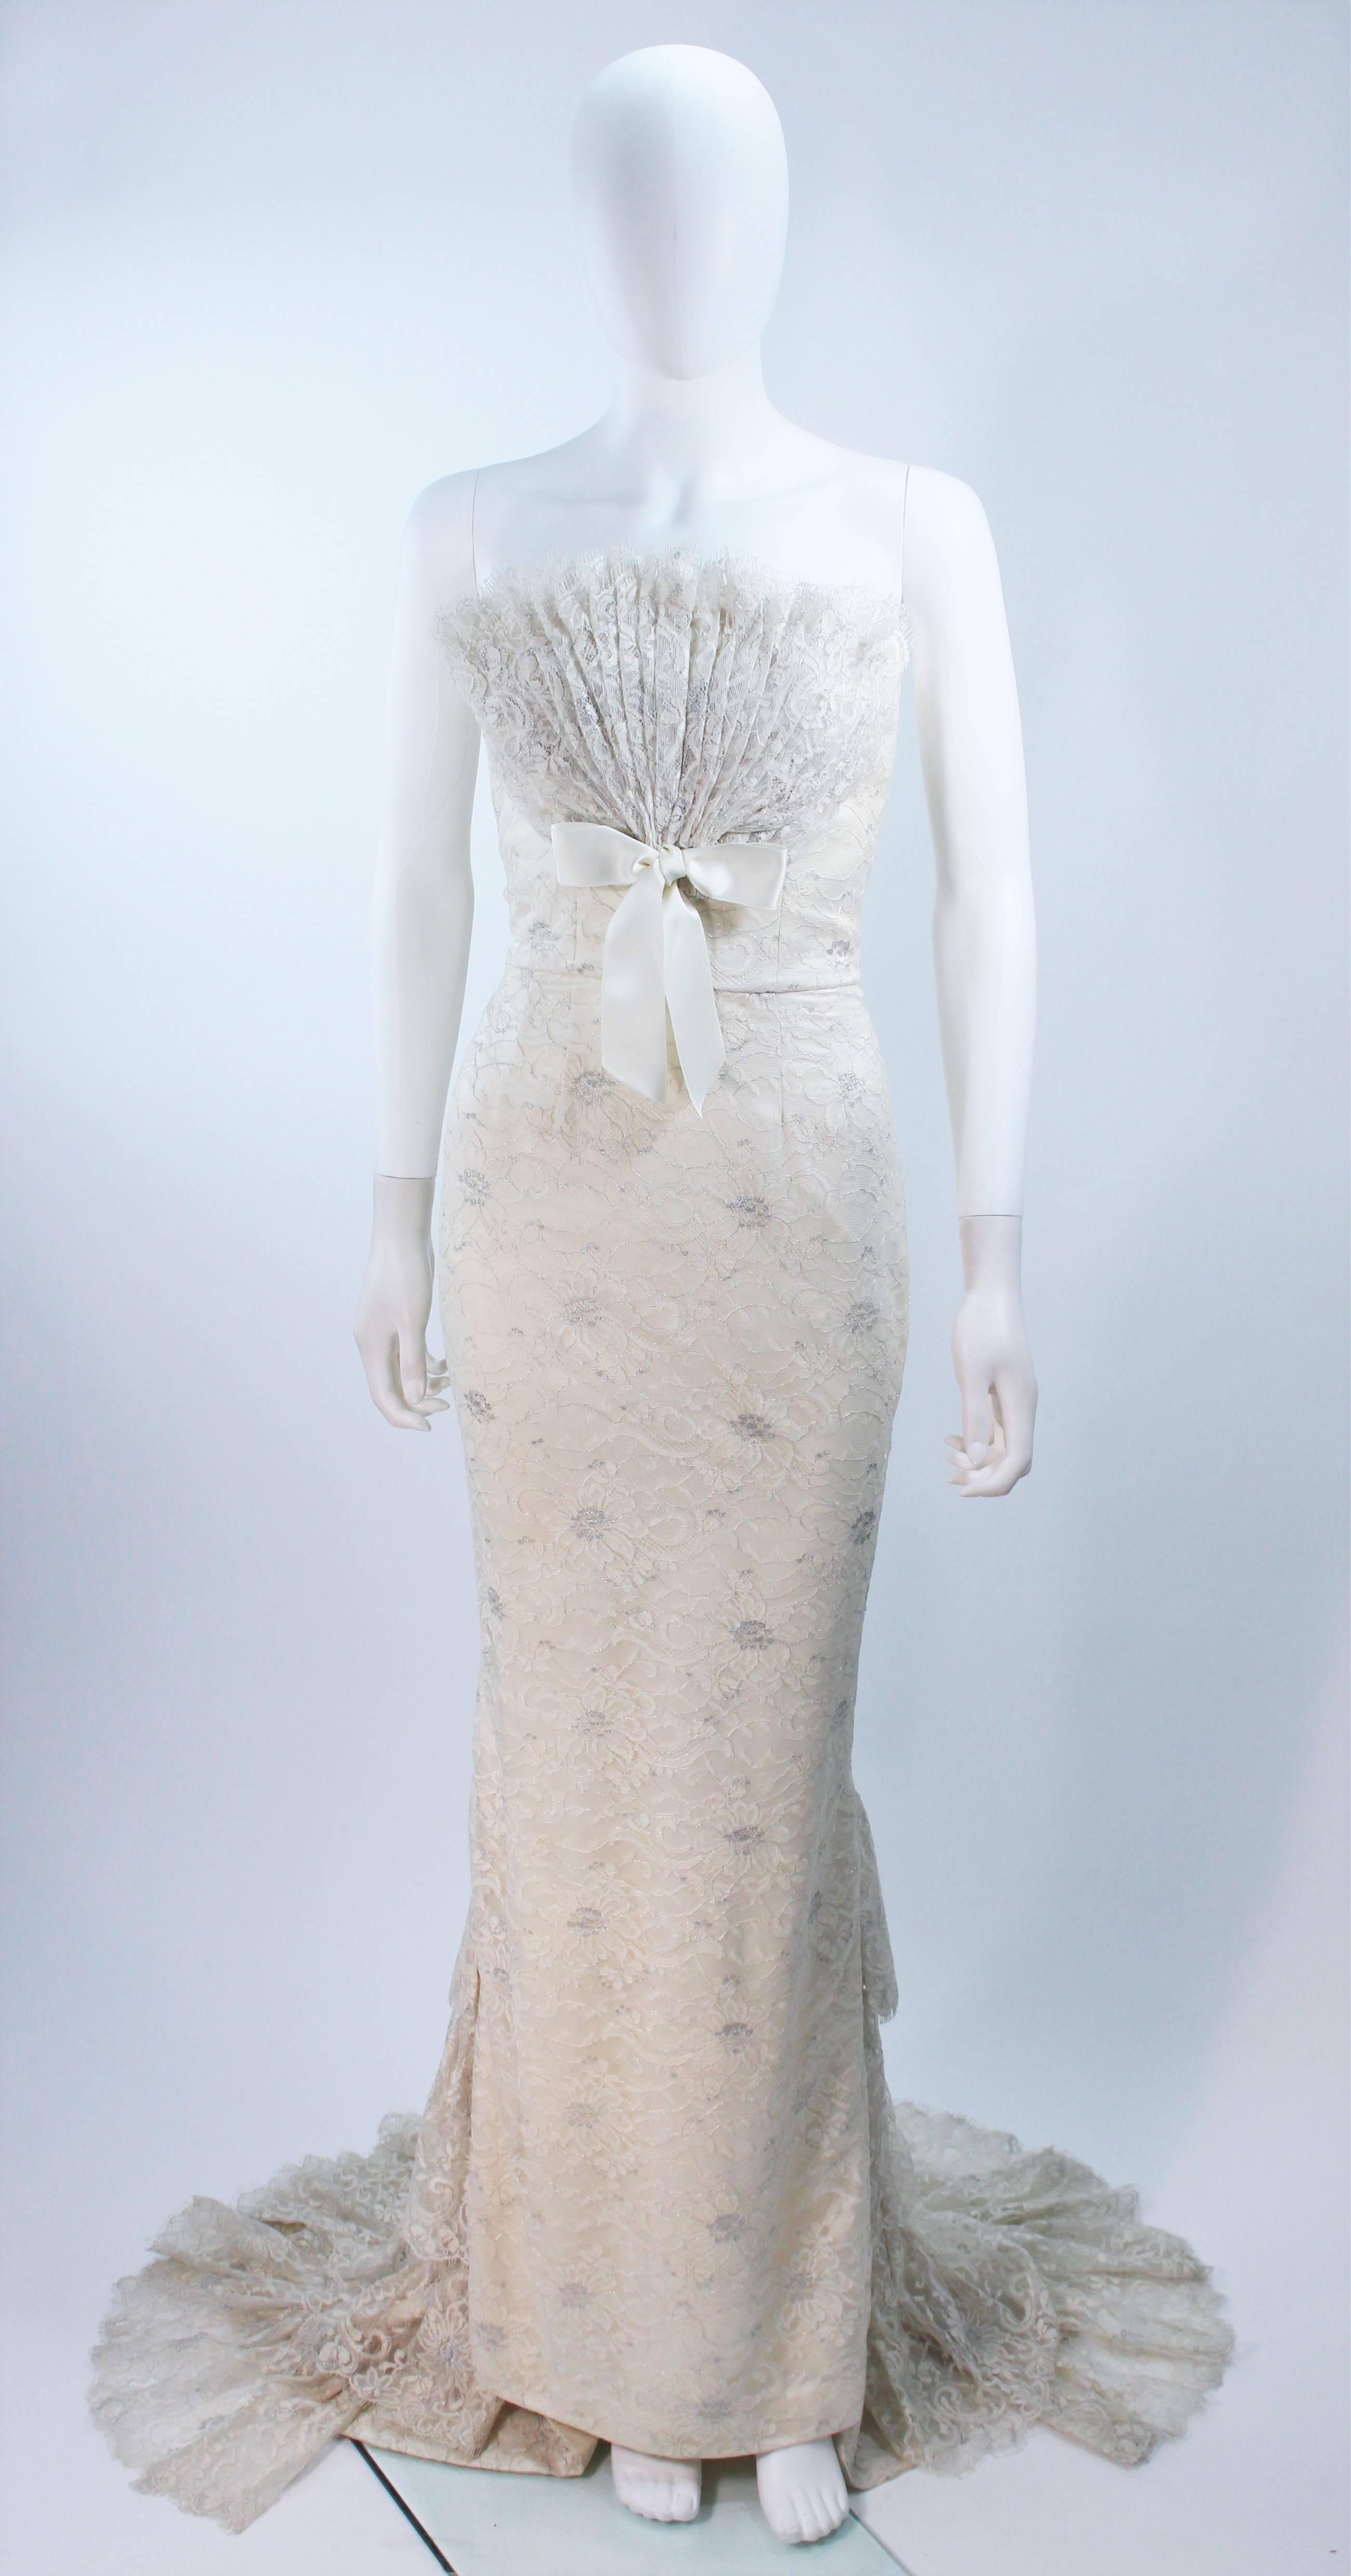 This Elizabeth Mason Couture gown features a stunning lace tier draped design with a train, and fanned bust. There is a fully boned foundation, as well as a hidden center back zipper.

This is a couture custom order. Please allow for a 120 day lead